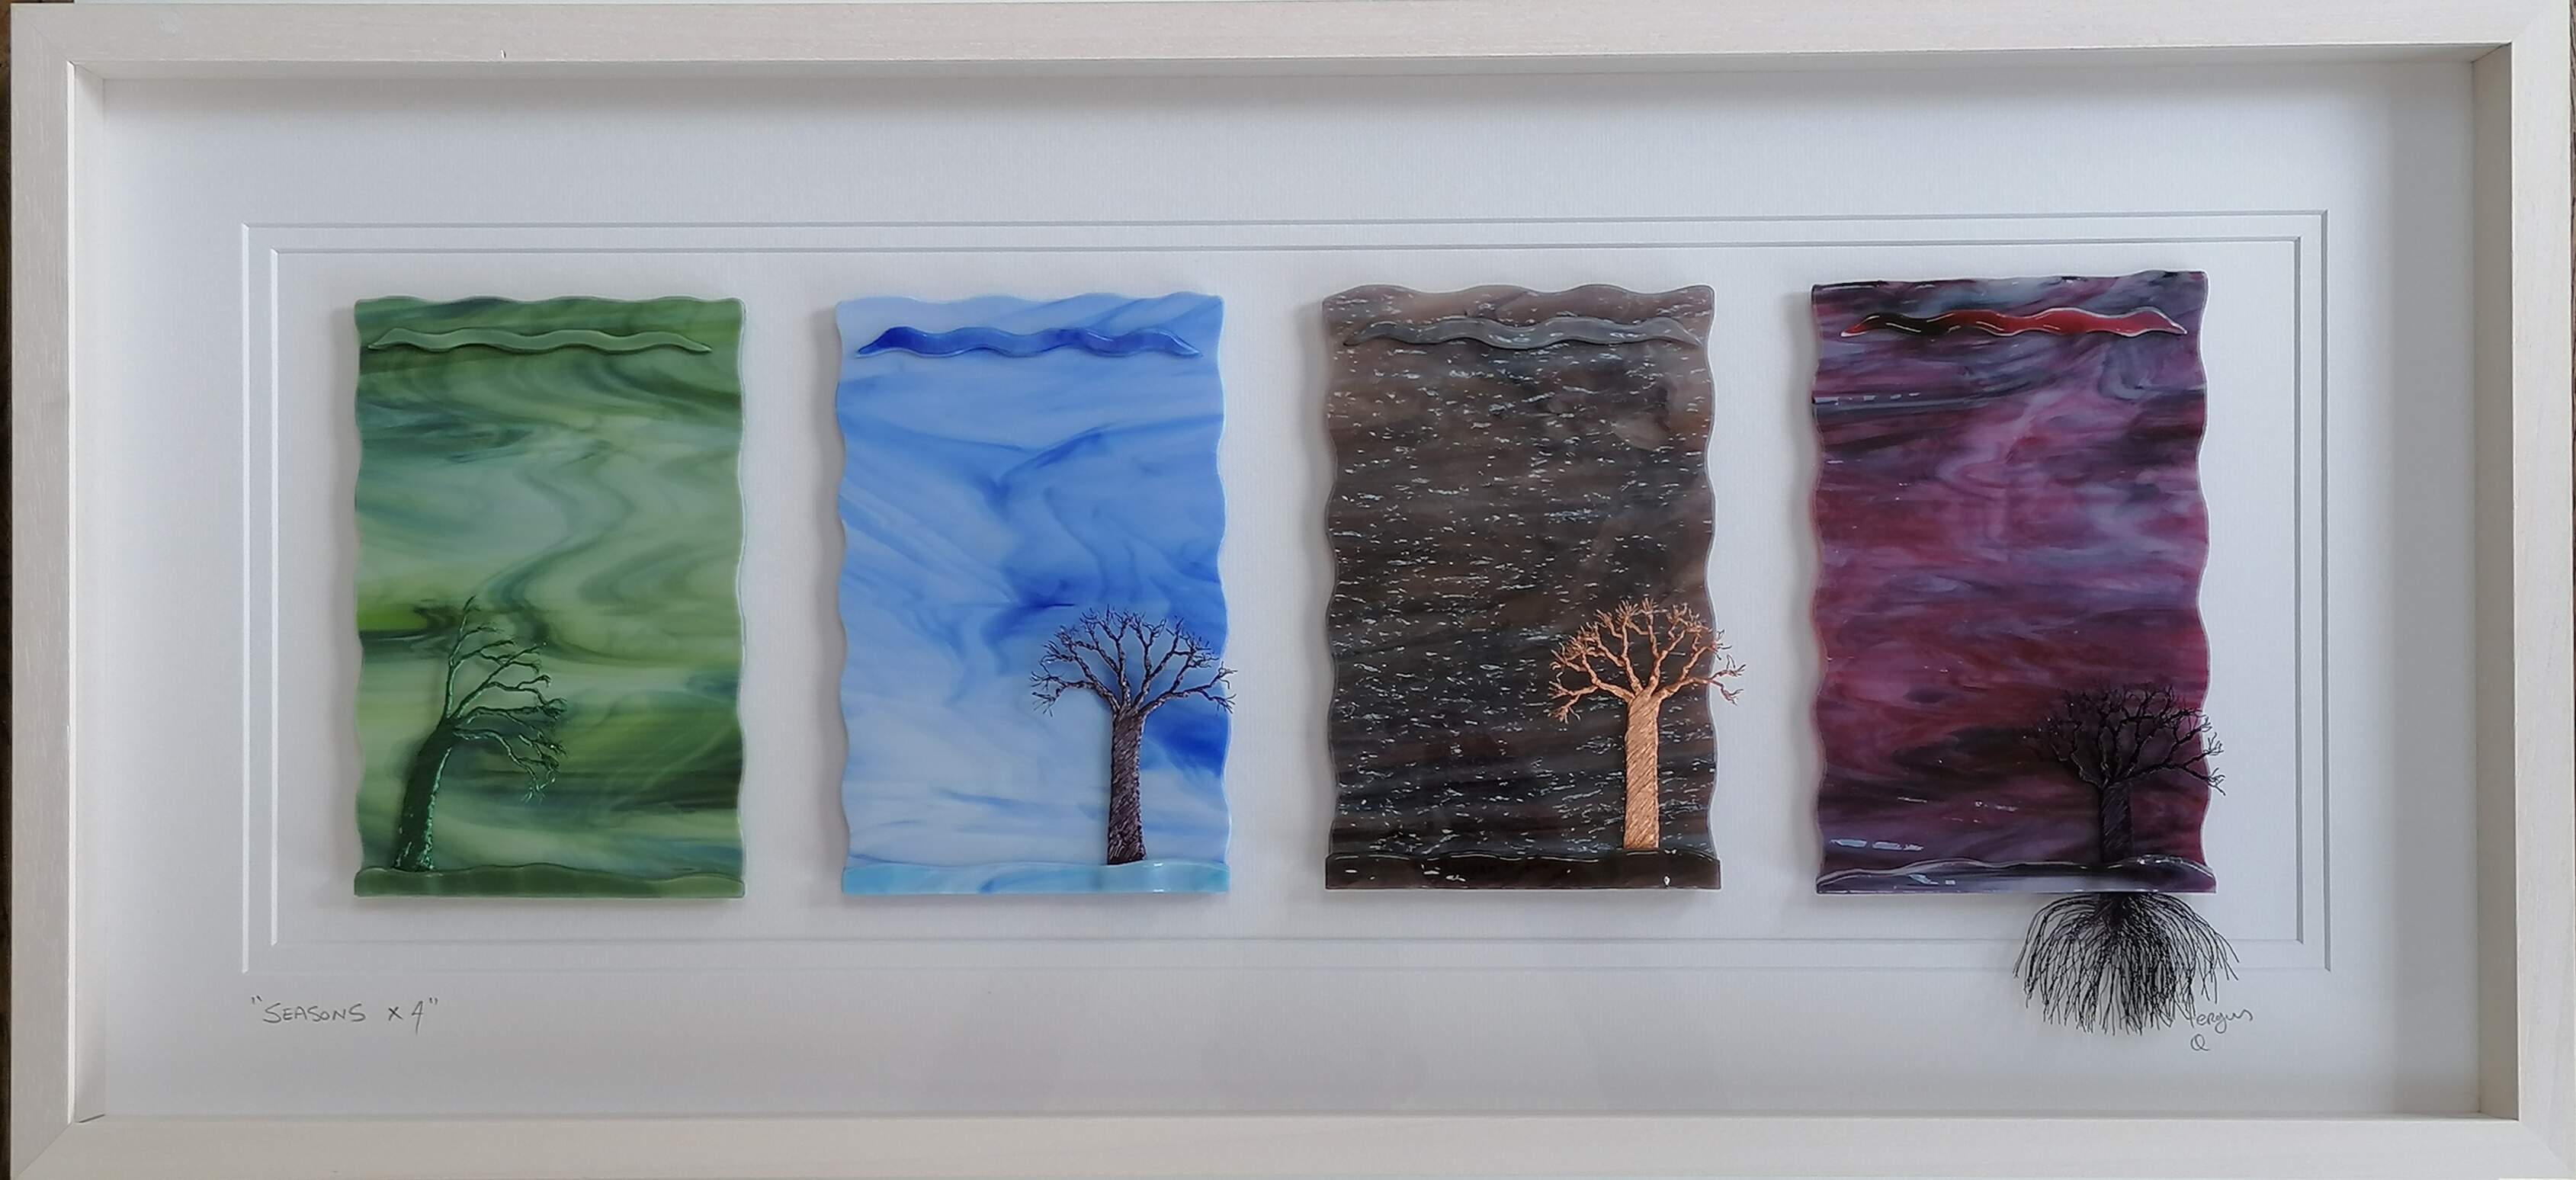 Glass Art picture displaying 4 panels representing the Seasons